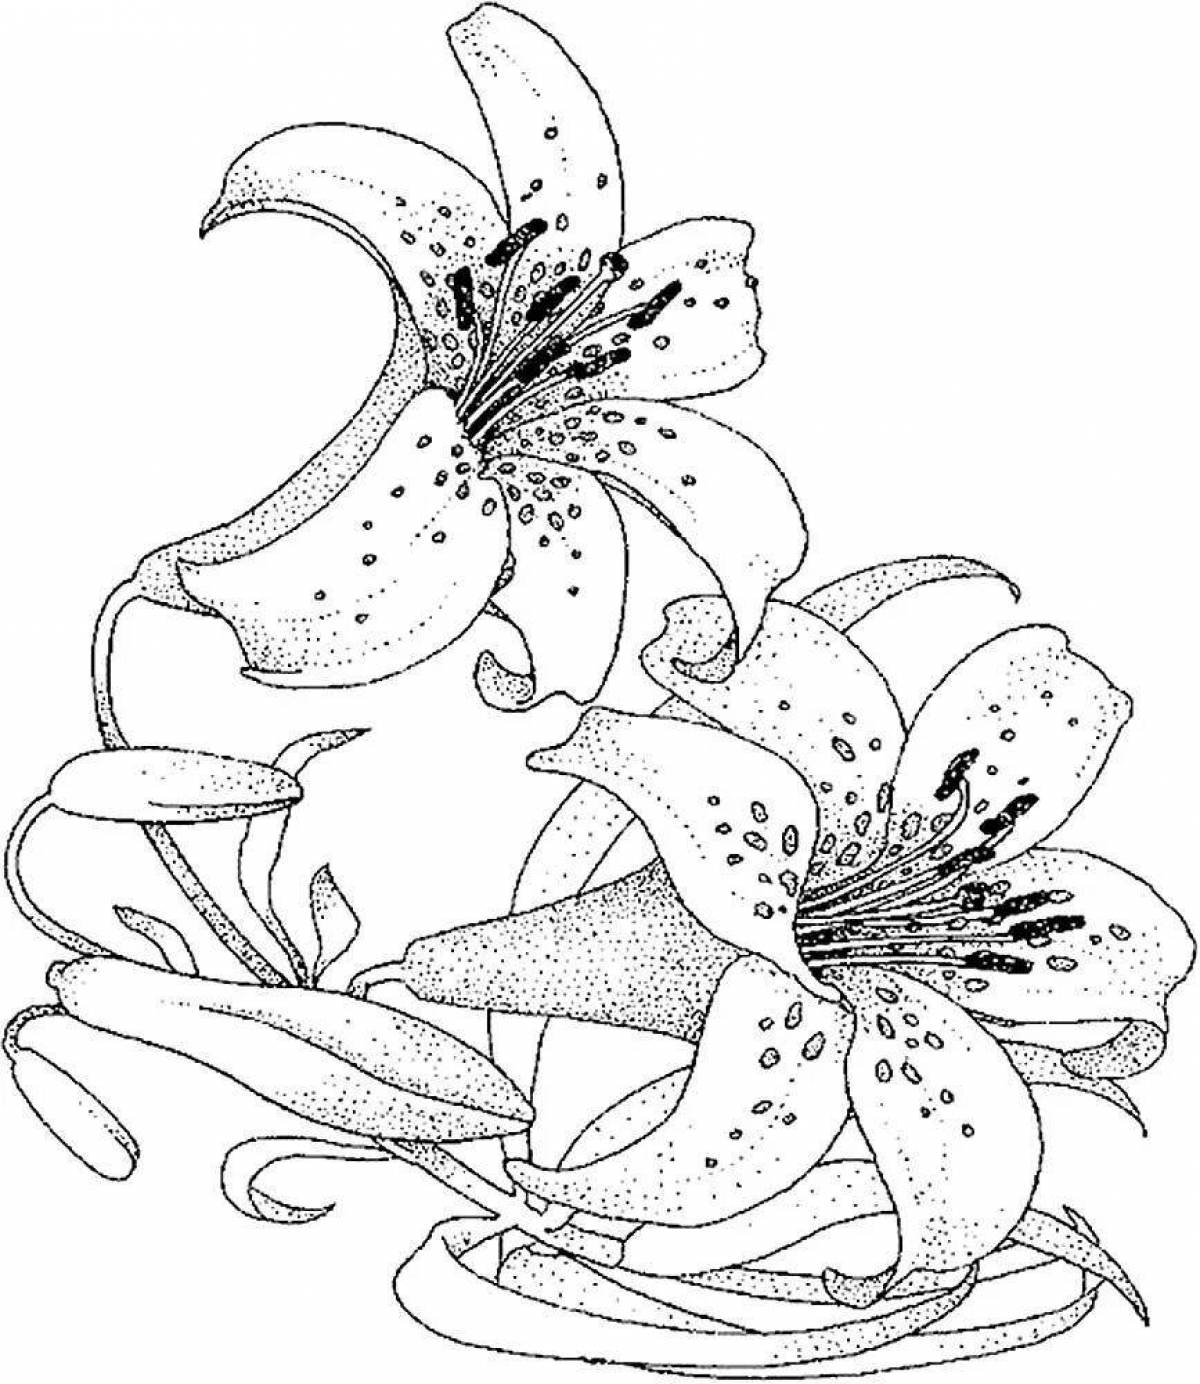 Fun lily coloring book for kids